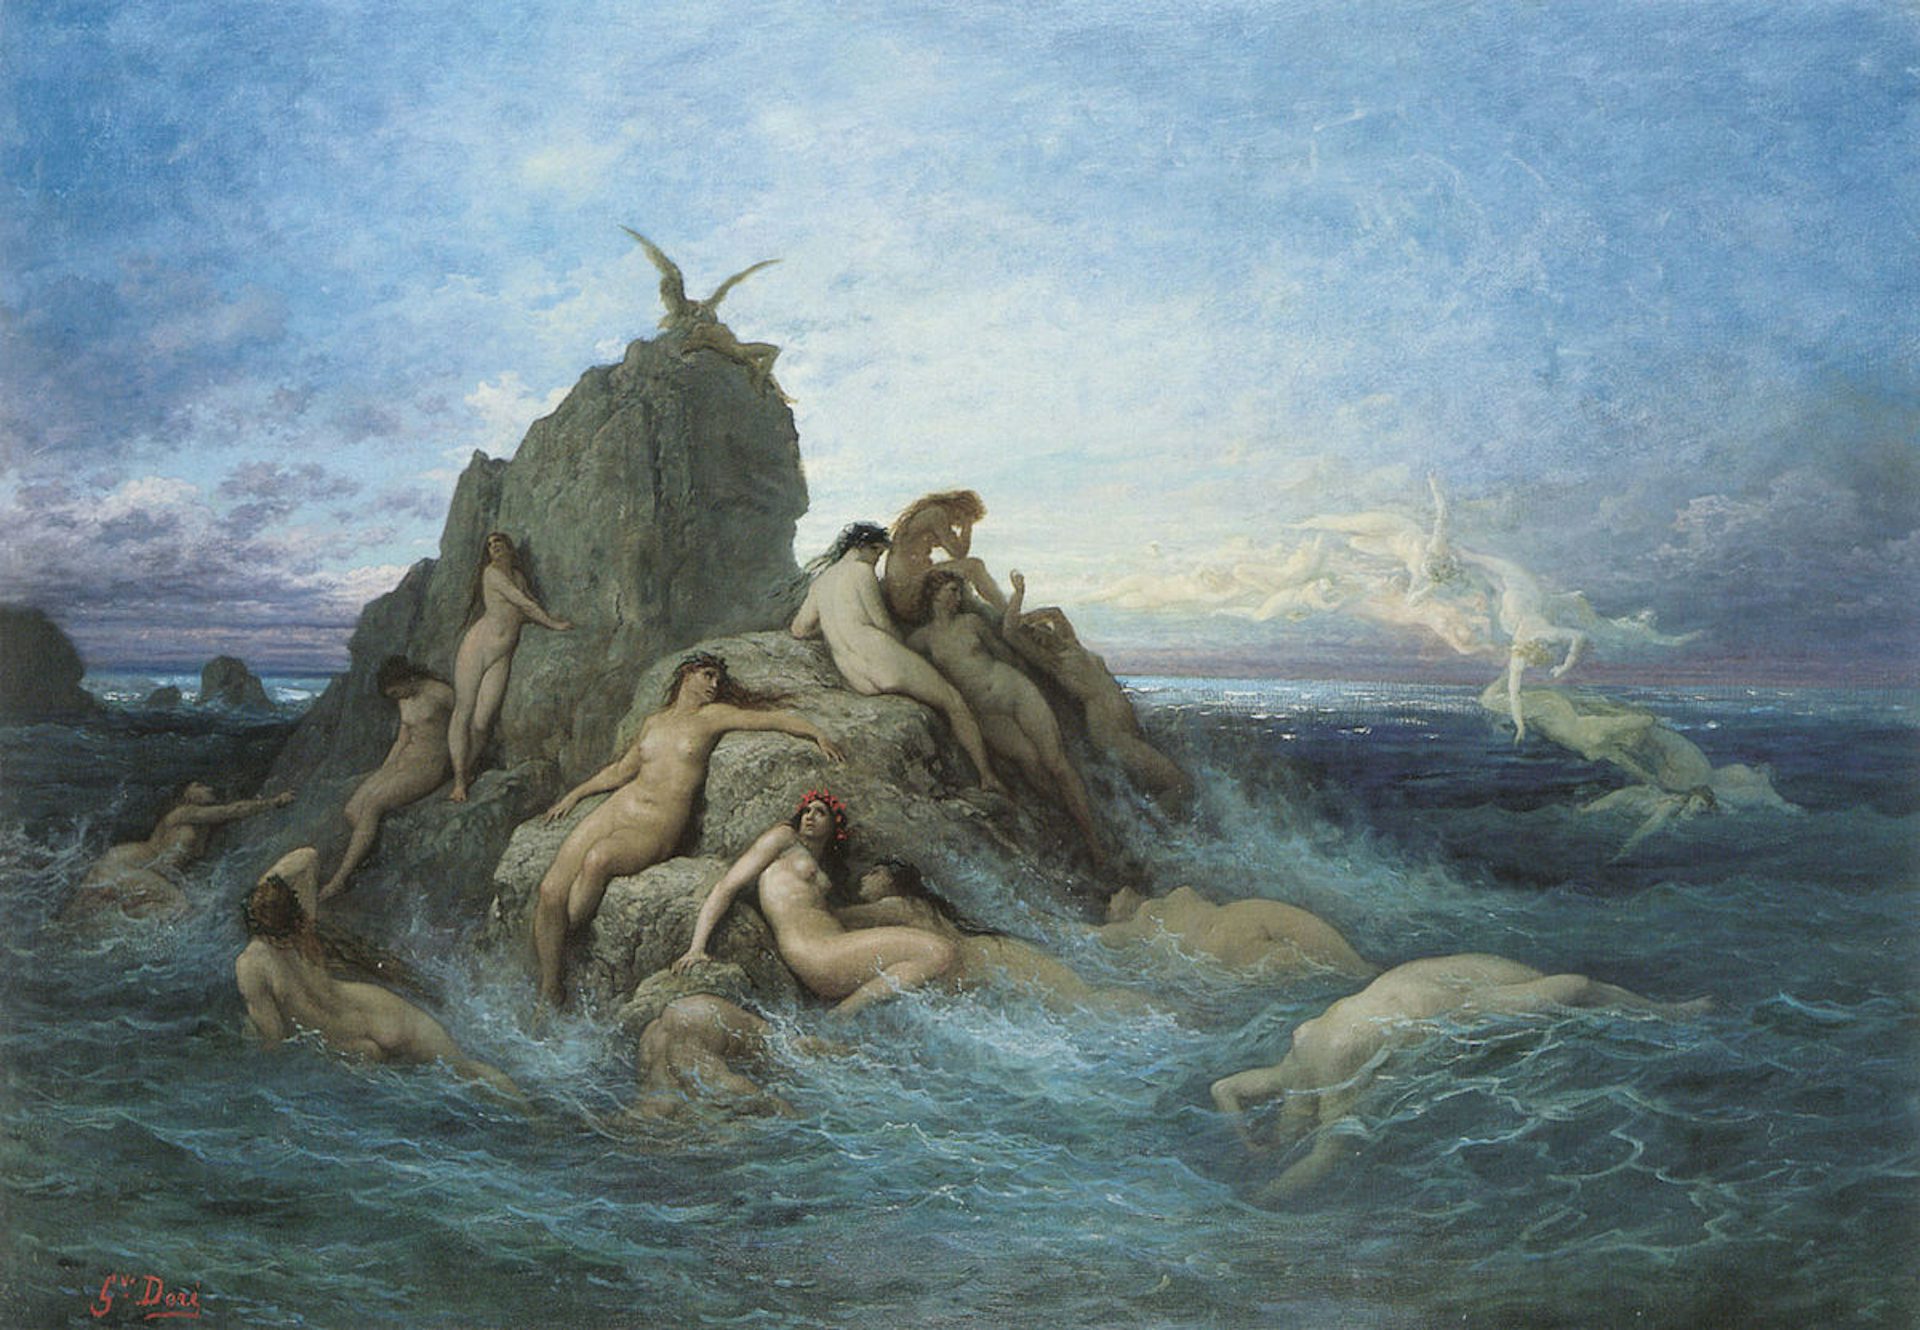 The Oceanids by Gustave Doré (1860–1869).